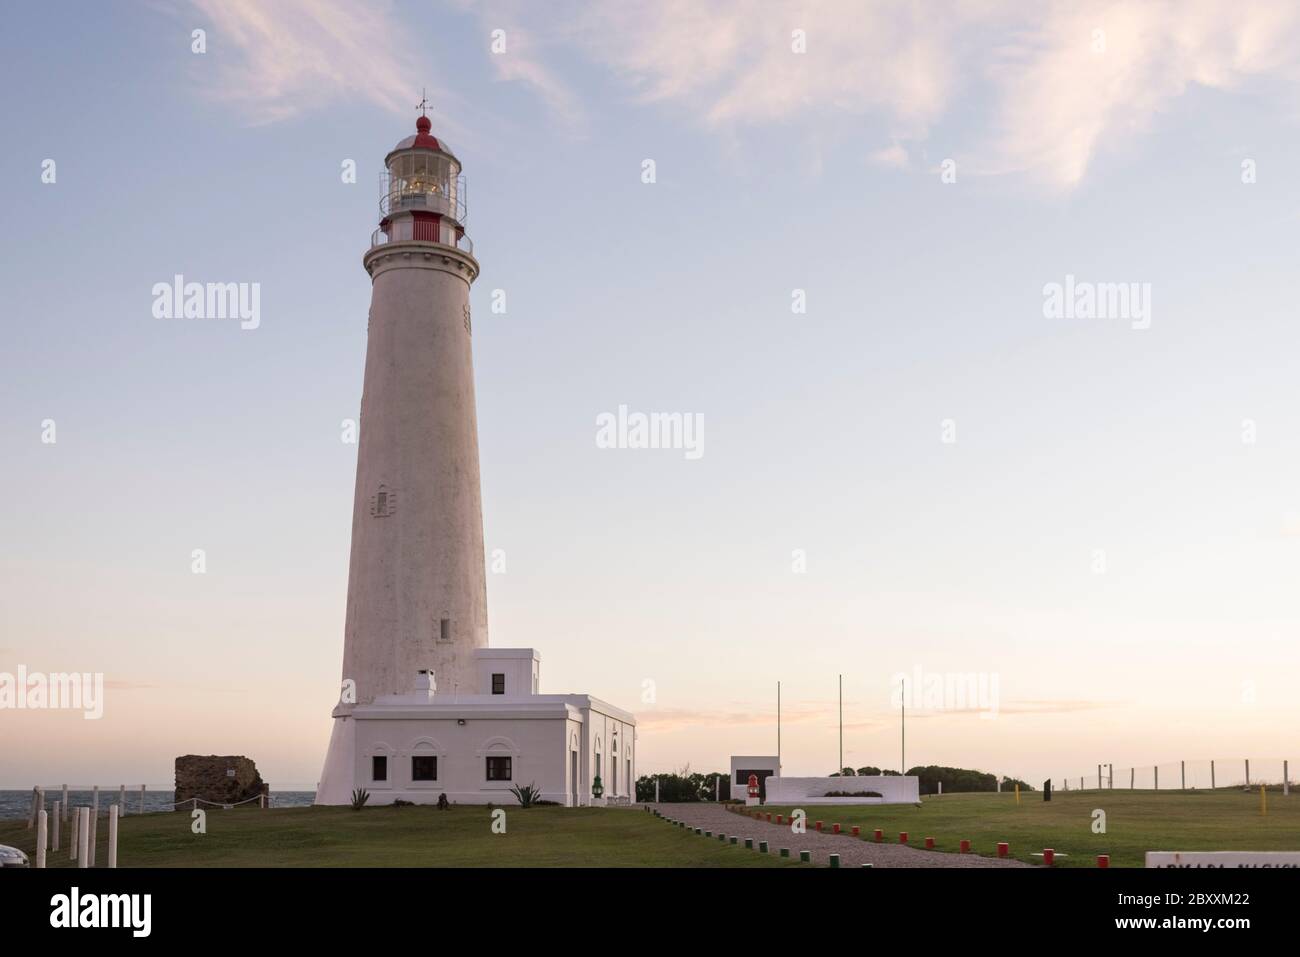 Lighthouse of Cabo de Santa Maria, an Uruguayan emblematic building declared National Historic Monument, located in La Paloma, Rocha, Uruguay. Sunset Stock Photo